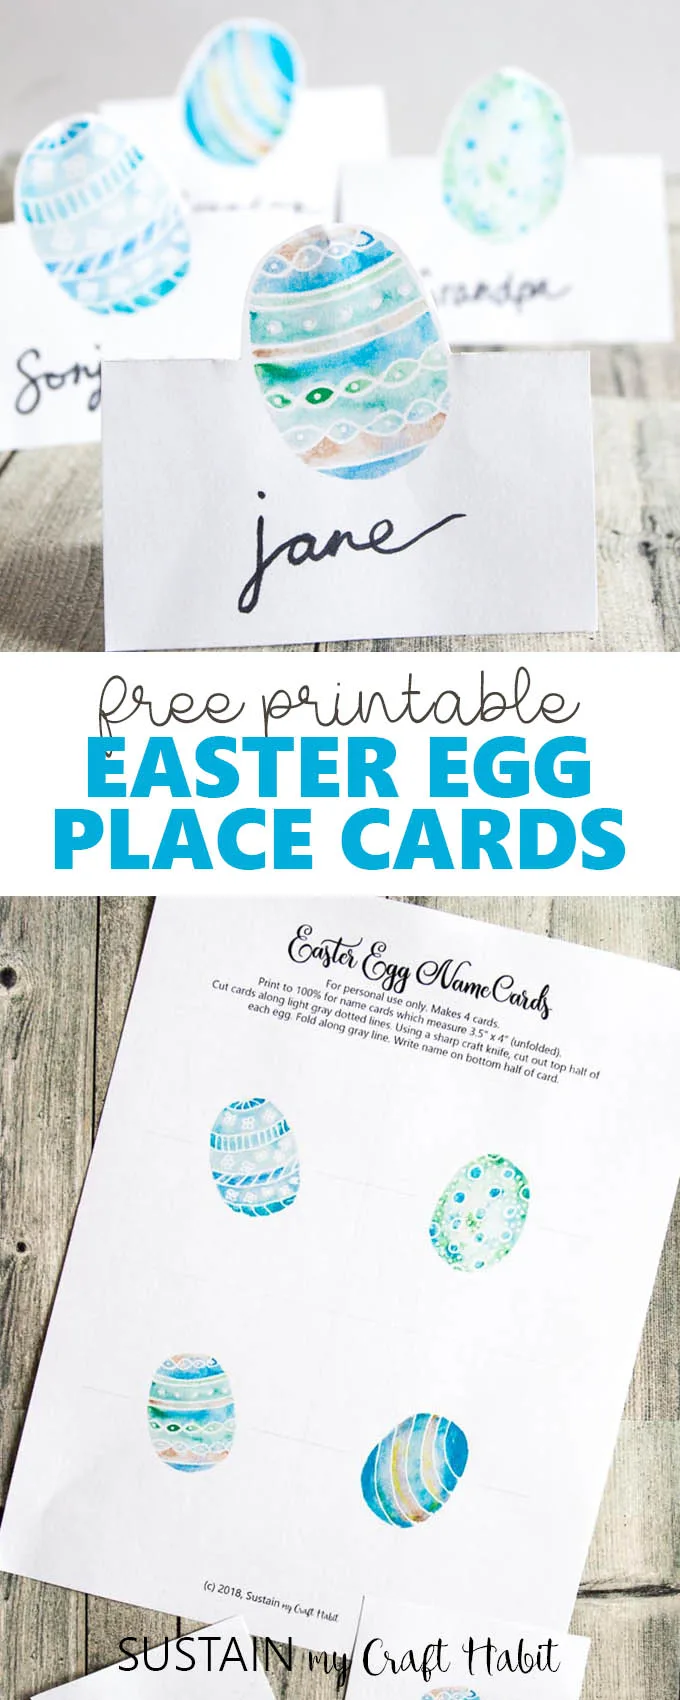 Collage of images showing the free Easter place cards printable.